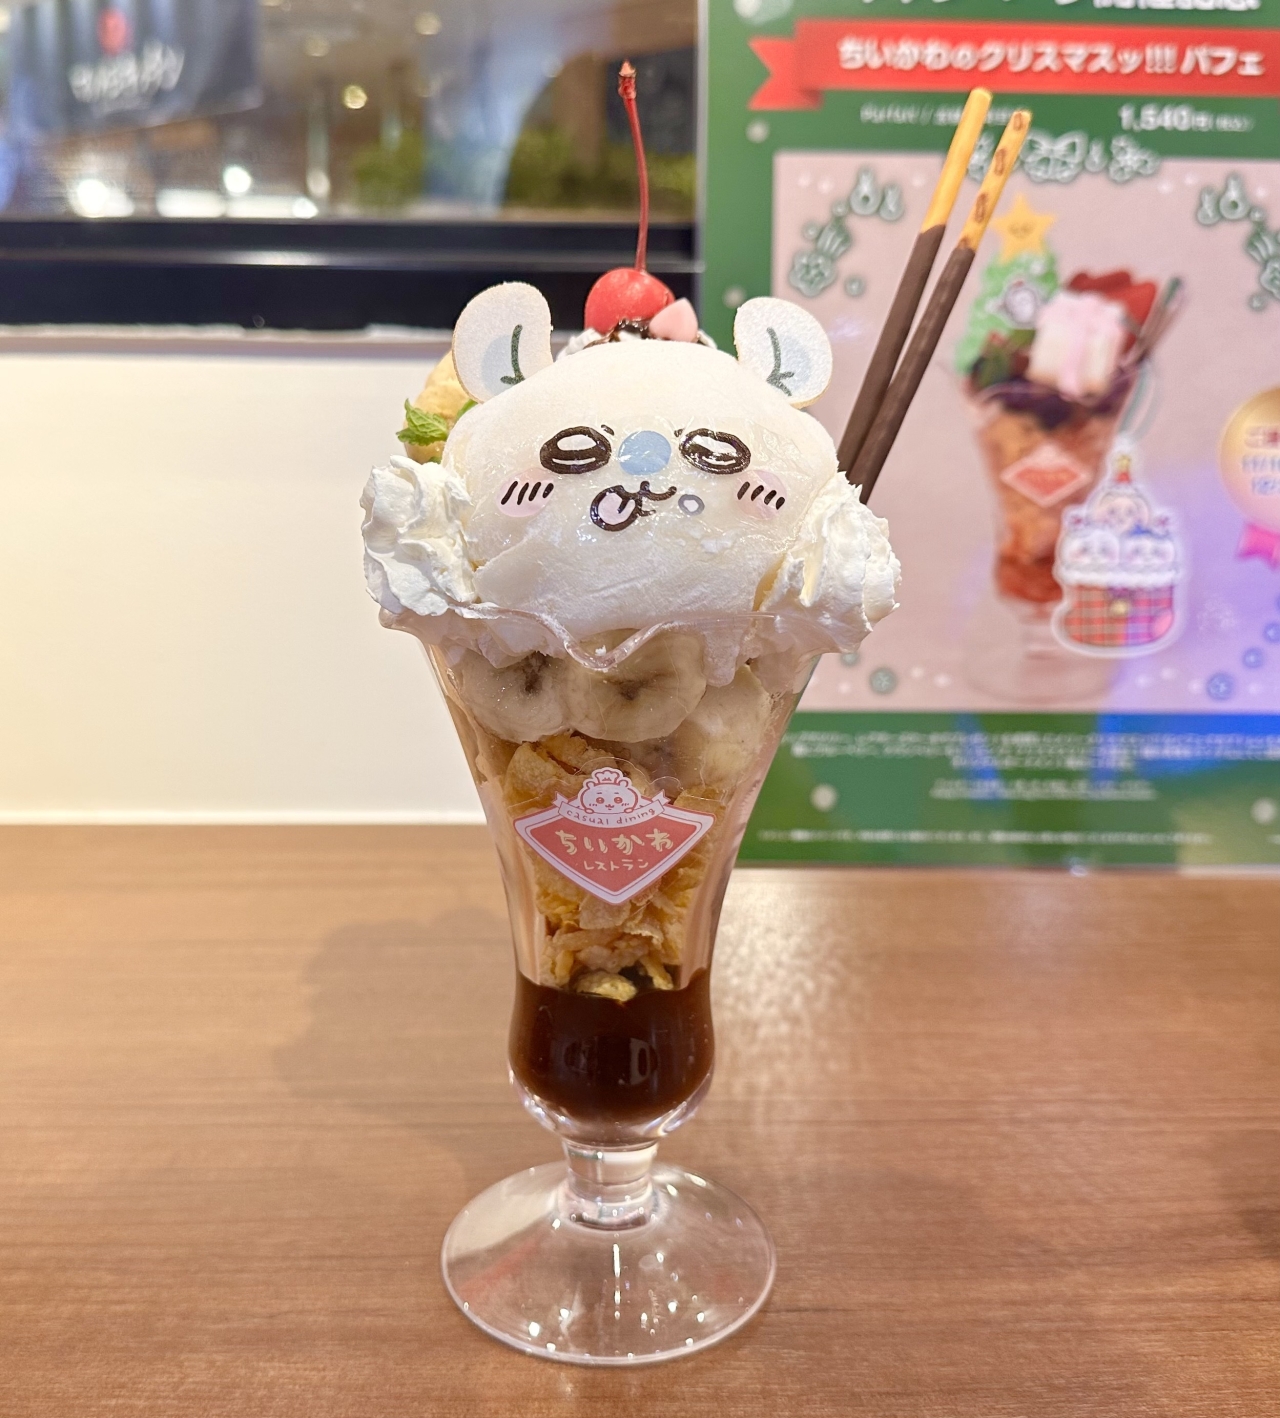 “Momonga’s Chocolate Banana Parfait ~I want to eat something sweet~” (1,540 yen *Available from December 26th)